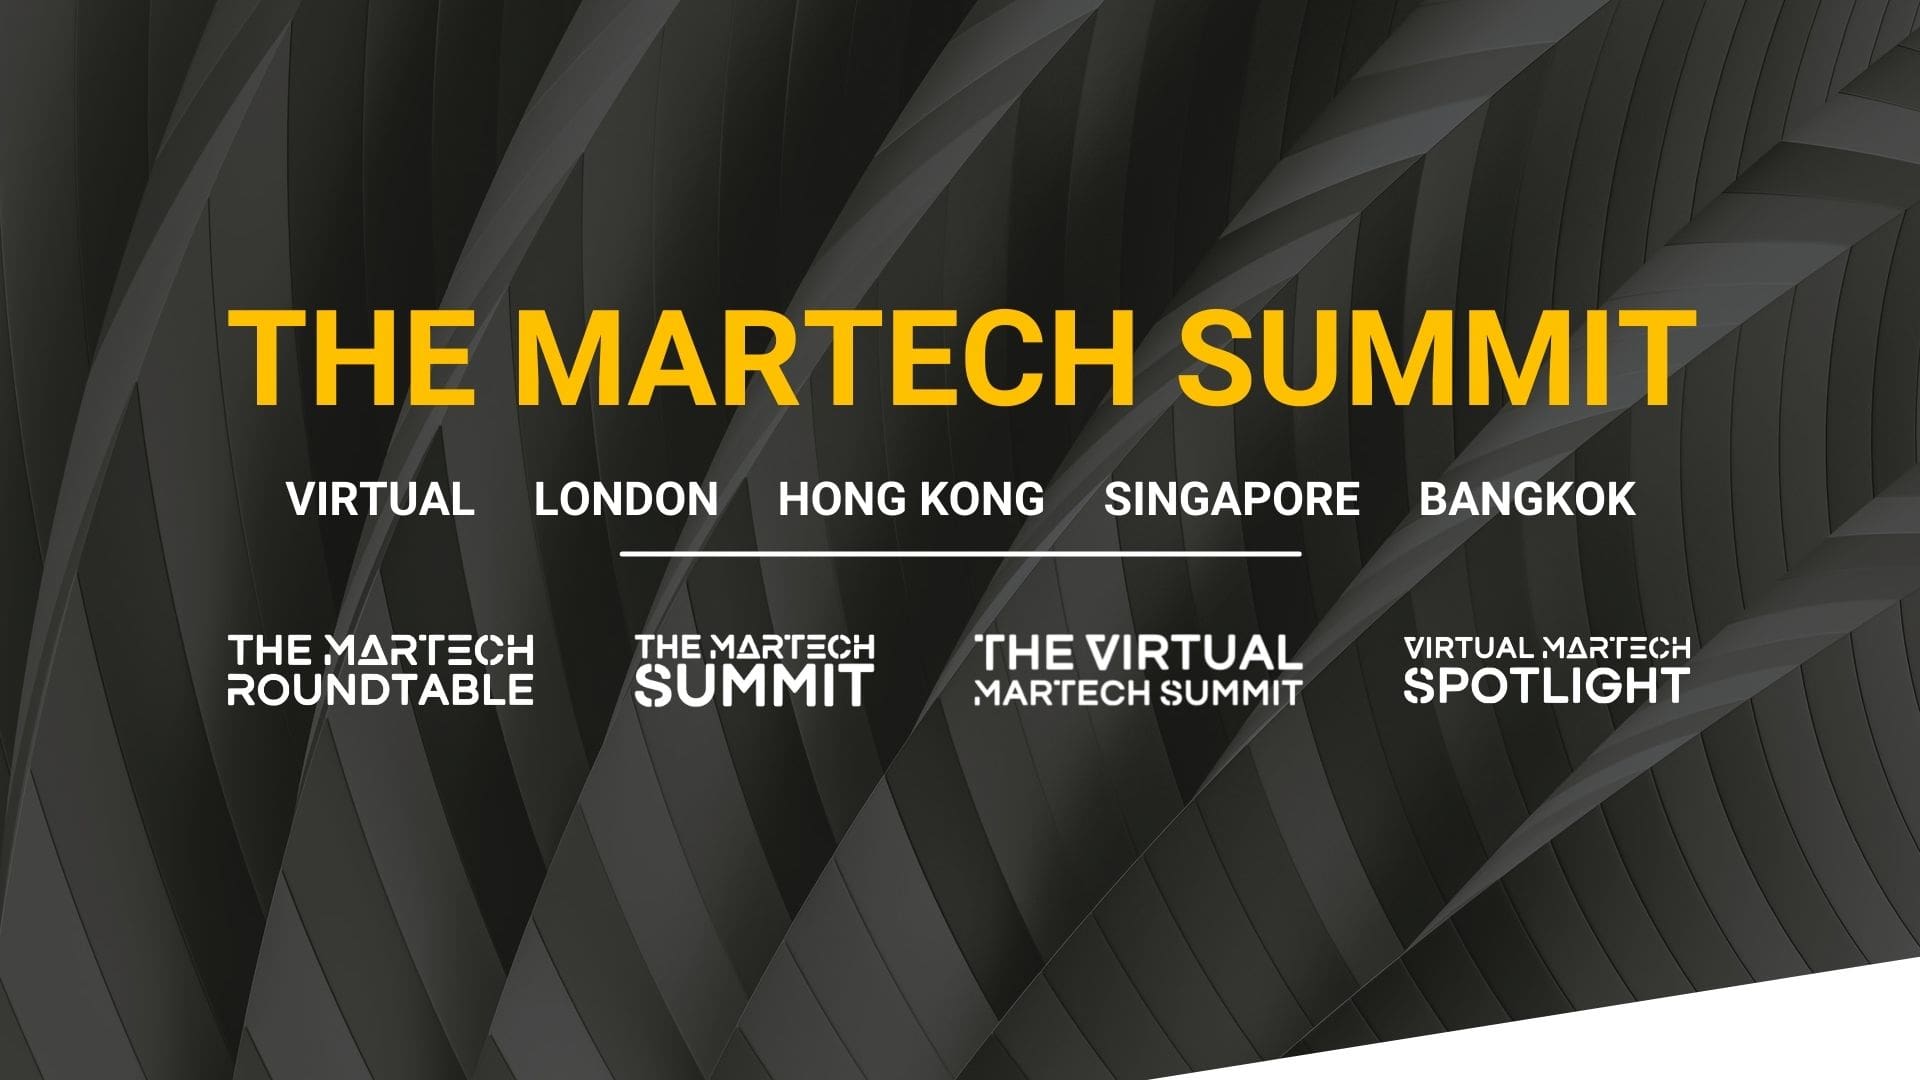 The martech summit